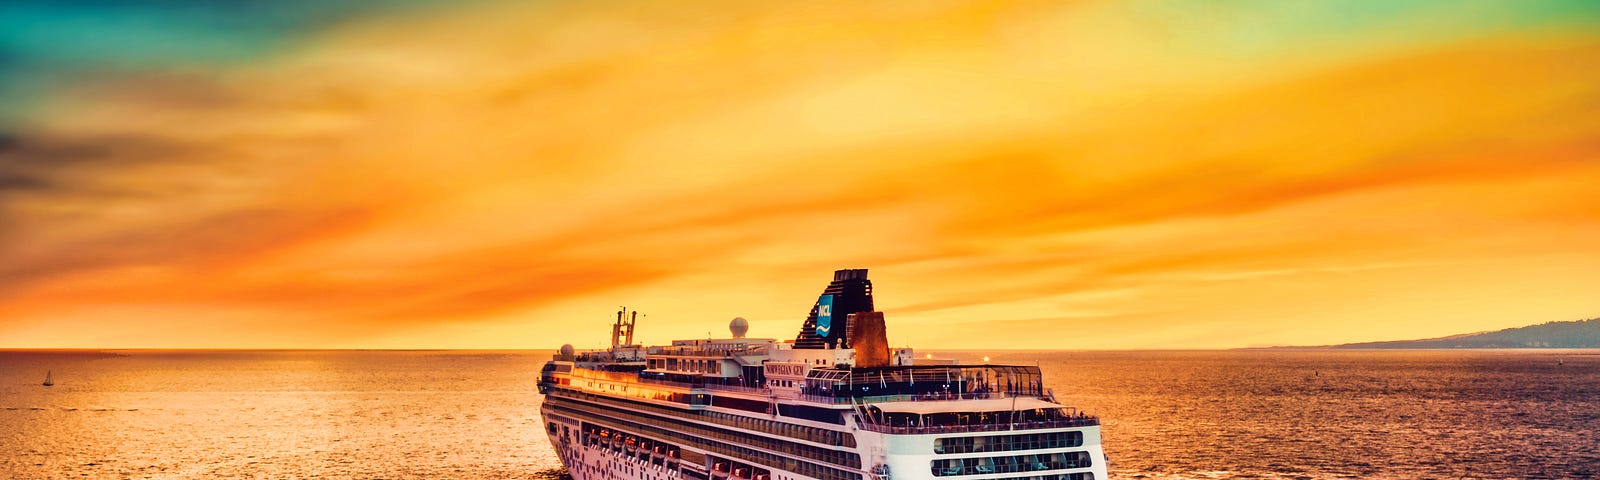 shows a cruise ship on the ocean heading toward a colorful sunset